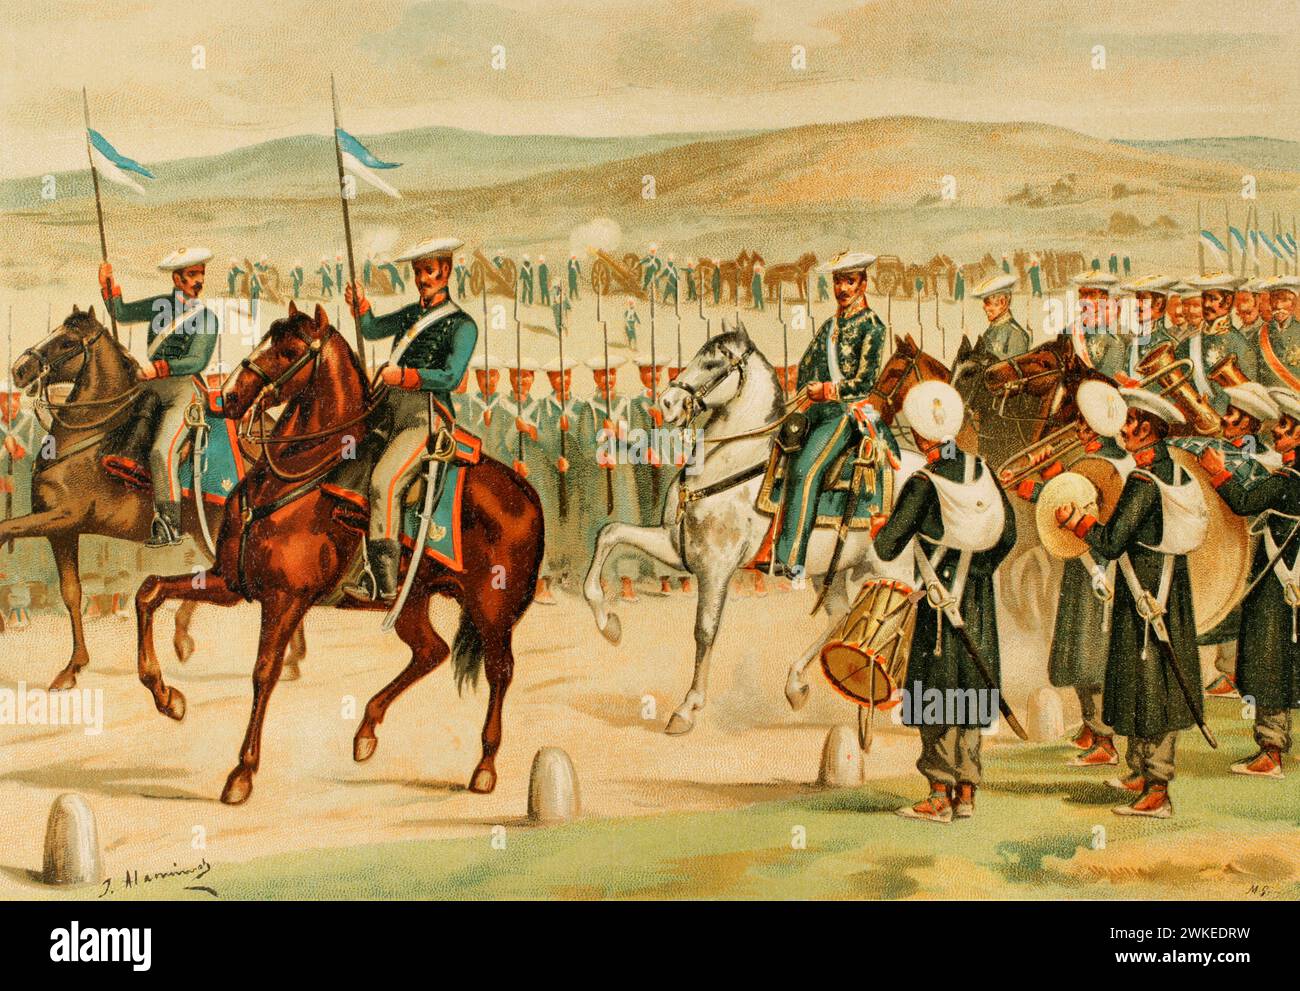 History of Spain. Carlos María Isidro de Borbón (1788-1855), known as Don Carlos. Infante of Spain, the first Carlist pretender to the Spanish throne as Carlos V. First Carlist War (1833-1840). Don Carlos reviewing his troops in Amurrio (Alava). The review took place on 1 December 1837, forming a division composed of thirteen battalions of five hundred soldiers each, along the camino real (royal road) to Bilbao. Don Carlos was accompanied by the Infante Don Sebastián. Illustration by J. Alaminos. Chromolithography. 'Historia de la Guerra Civil y de los Partidos Liberal y Carlista' (History of Stock Photo